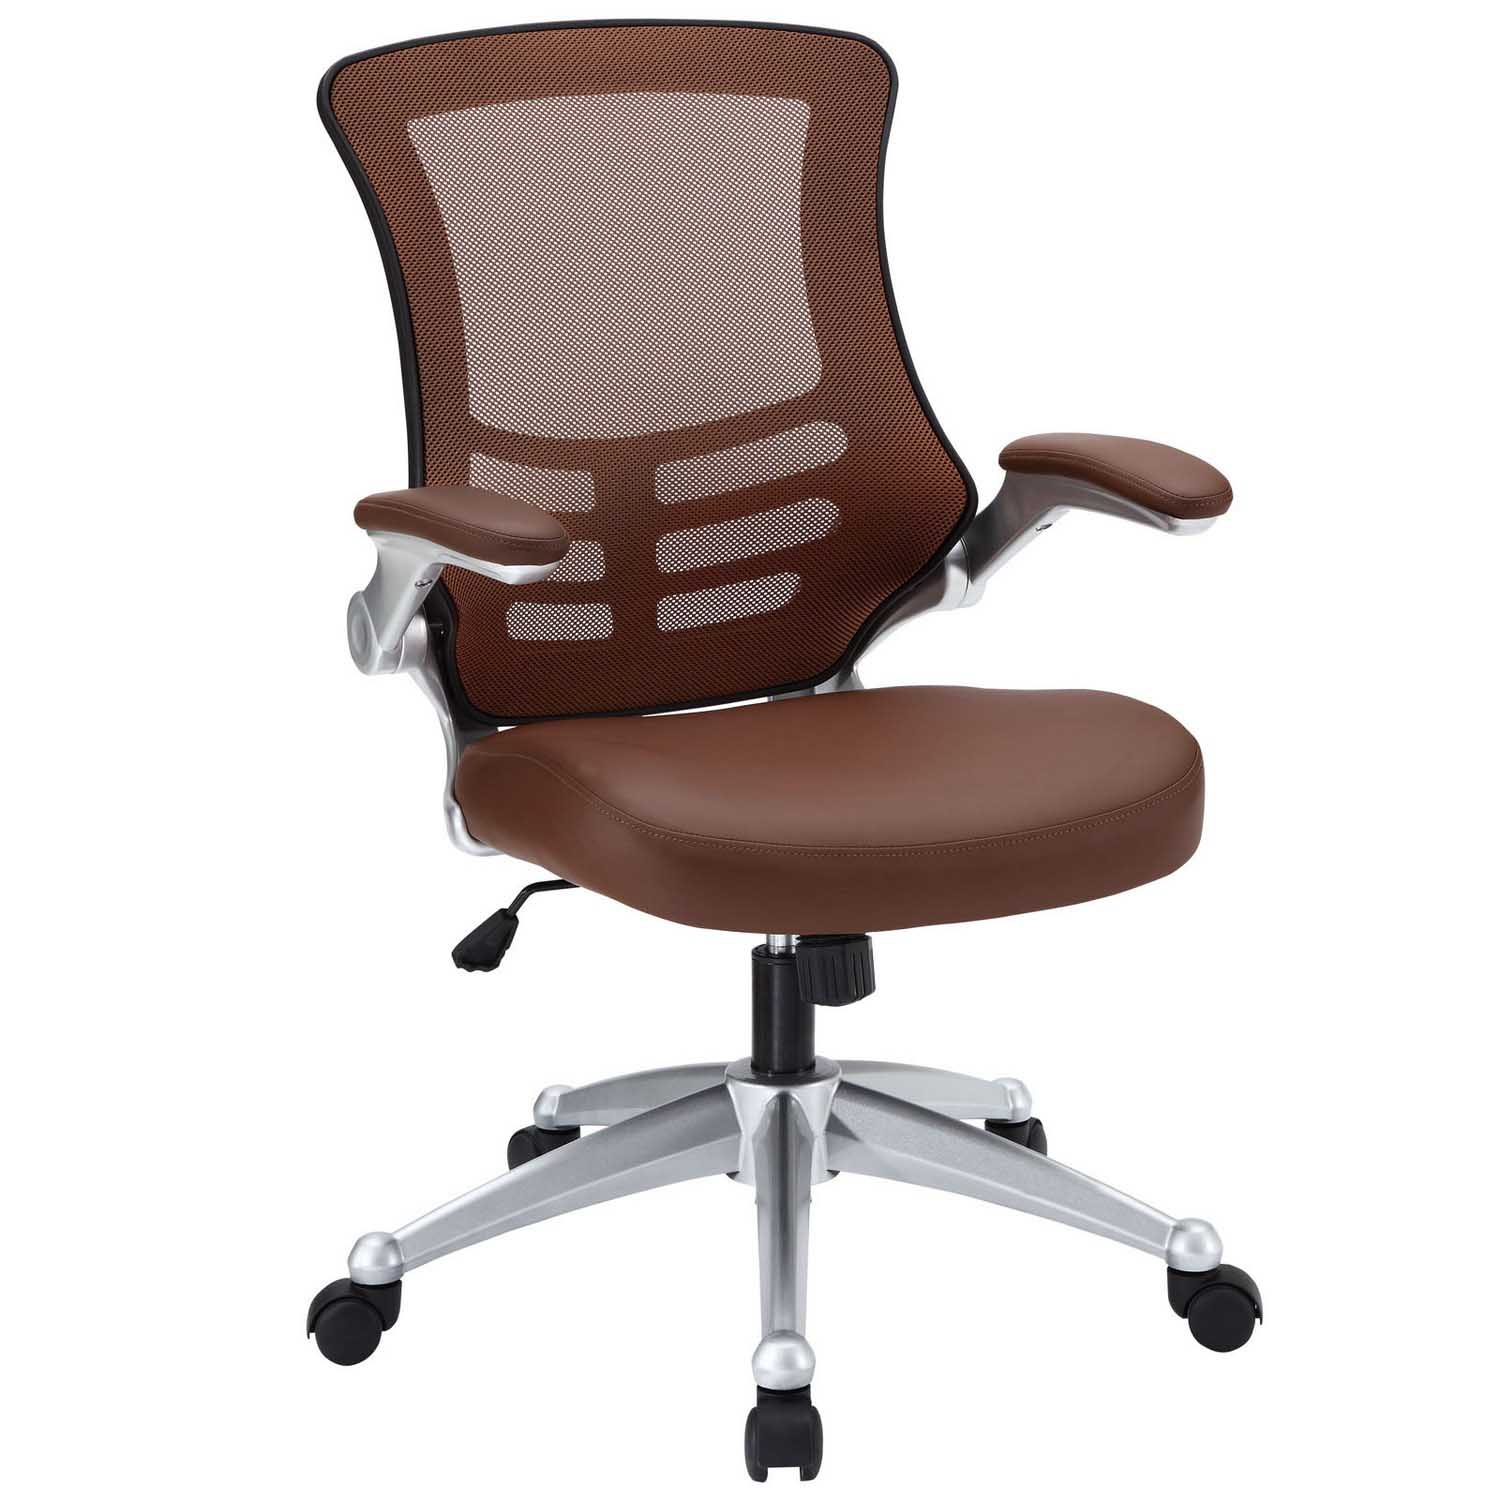 Modway Attainment Office Chair - Tan